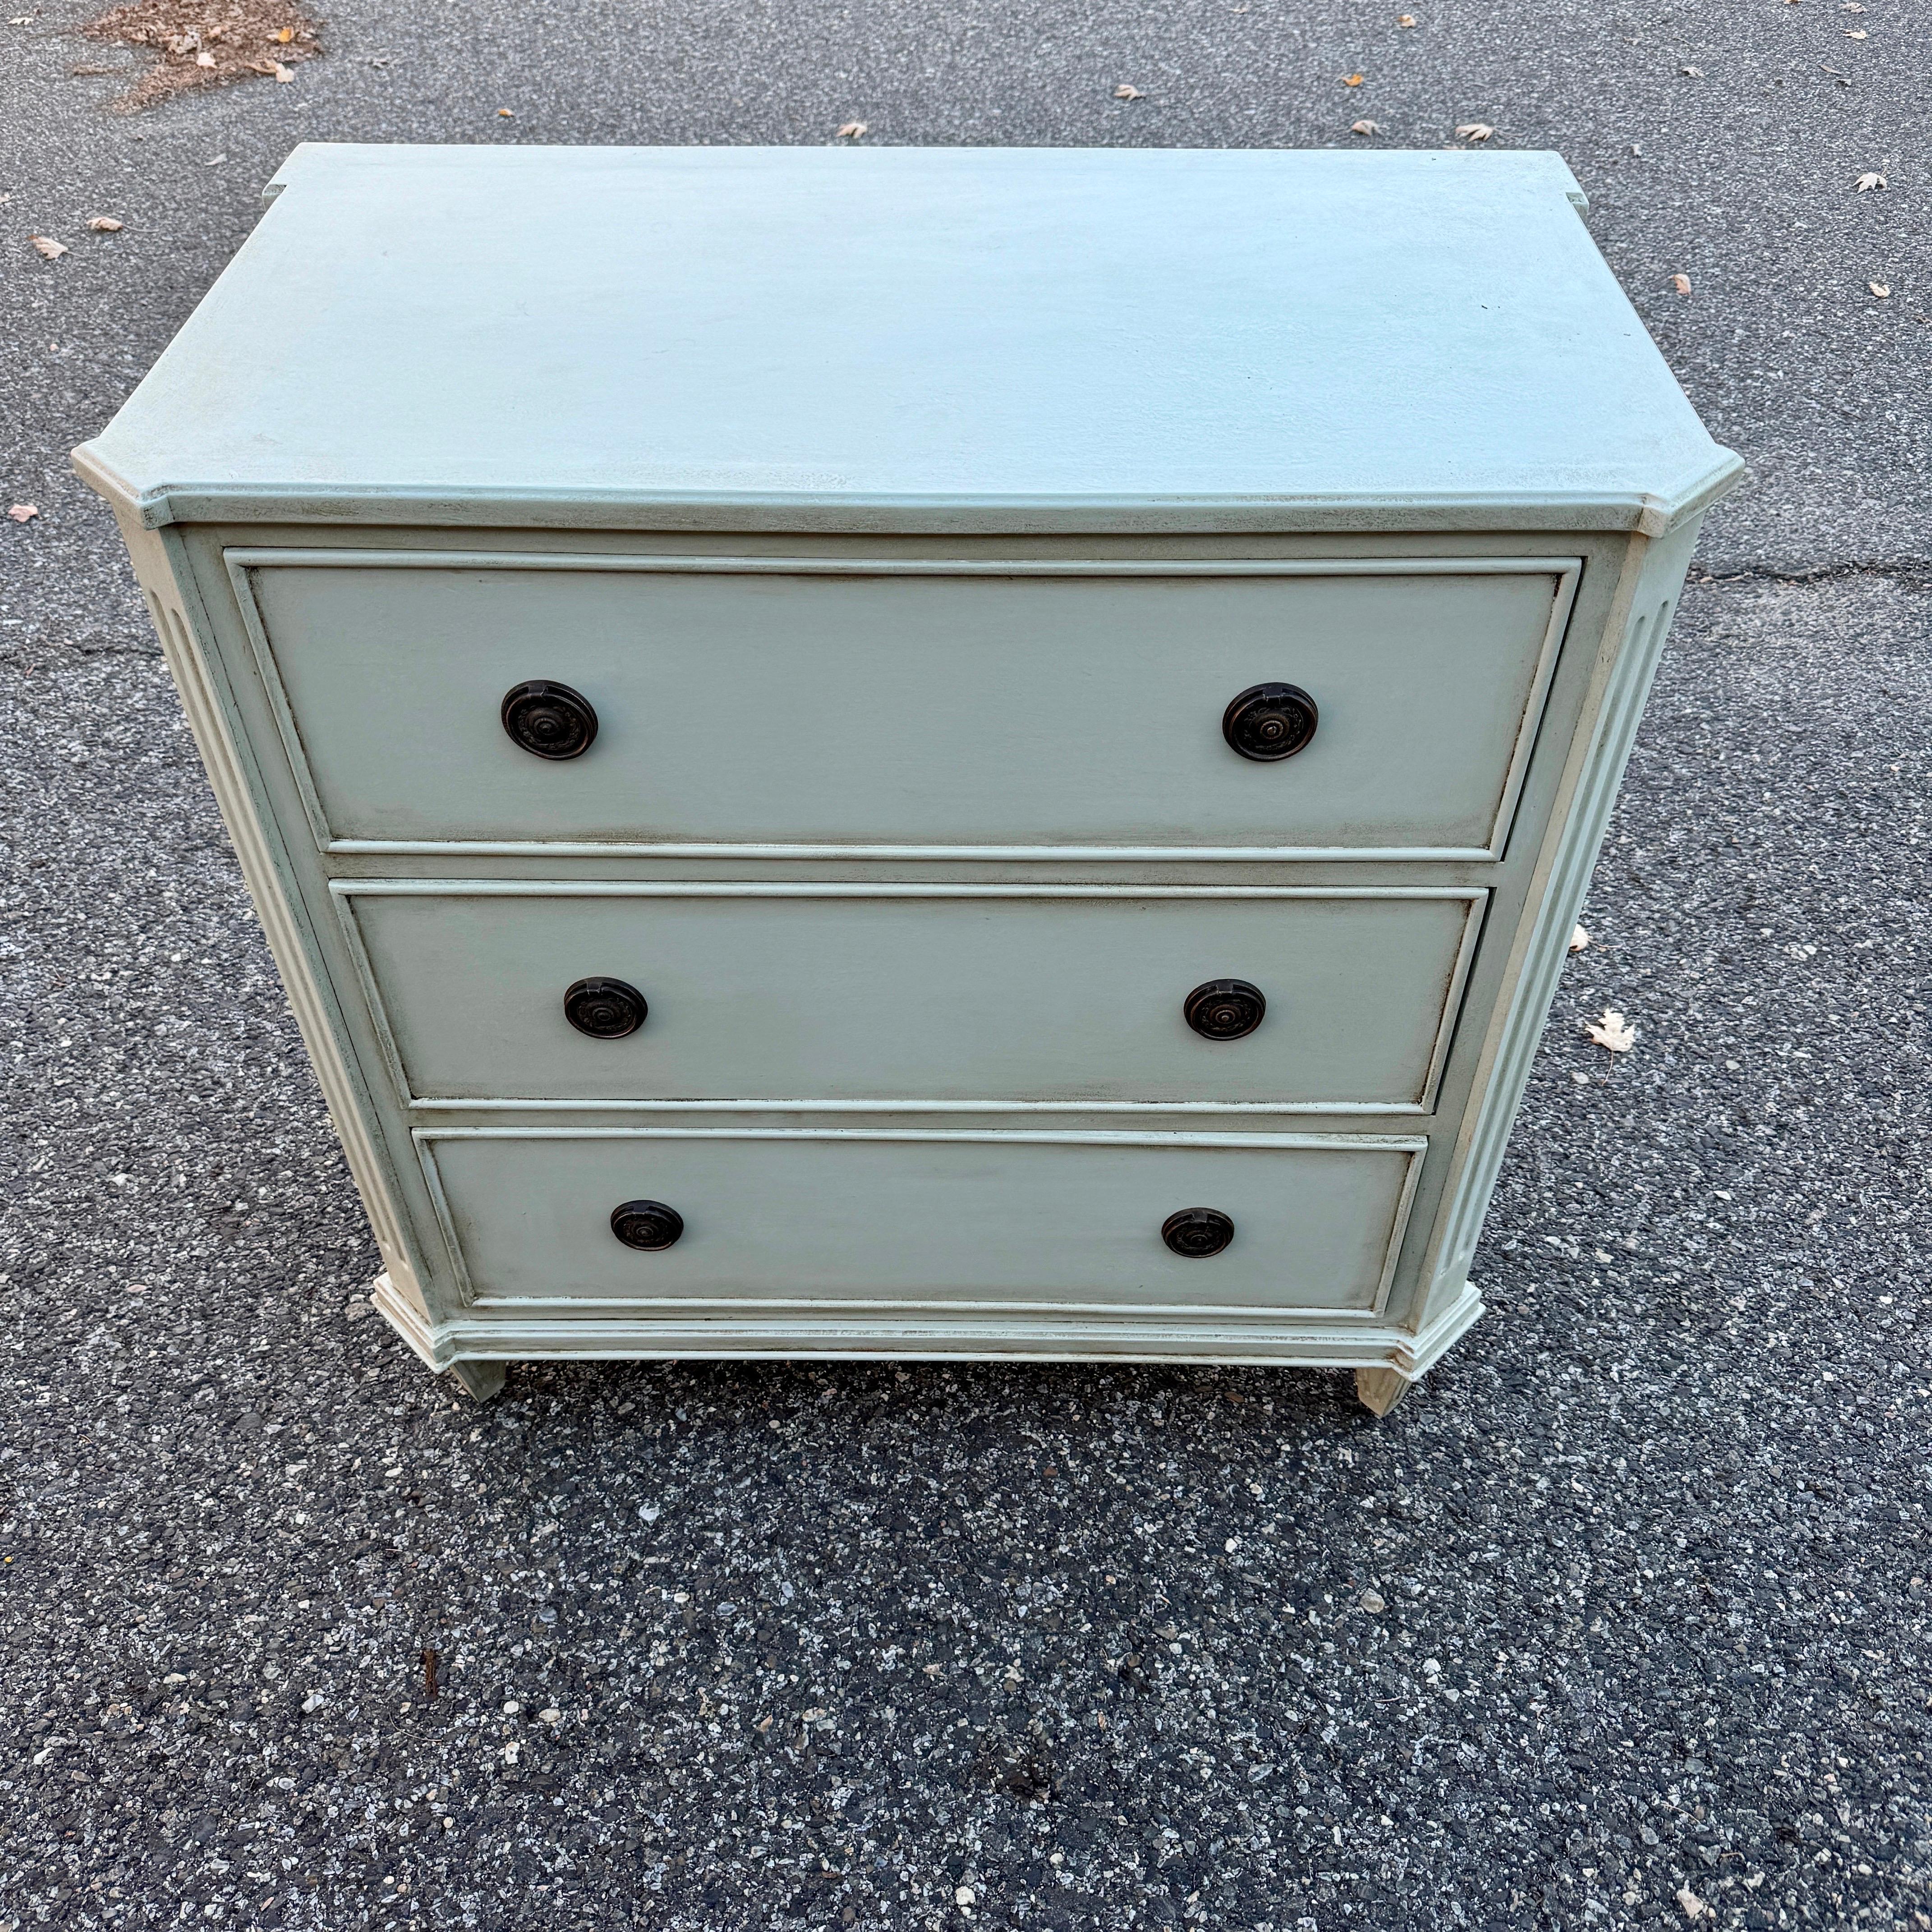 Painted Swedish Gustavian Style 3 Drawer Chest Bureau

Three drawer bureau based on an 18th Century Gustavian antique chest. Handmade and hand painted with solid wood legs and frame. Great detailing including brass hardware pulls. This piece is very